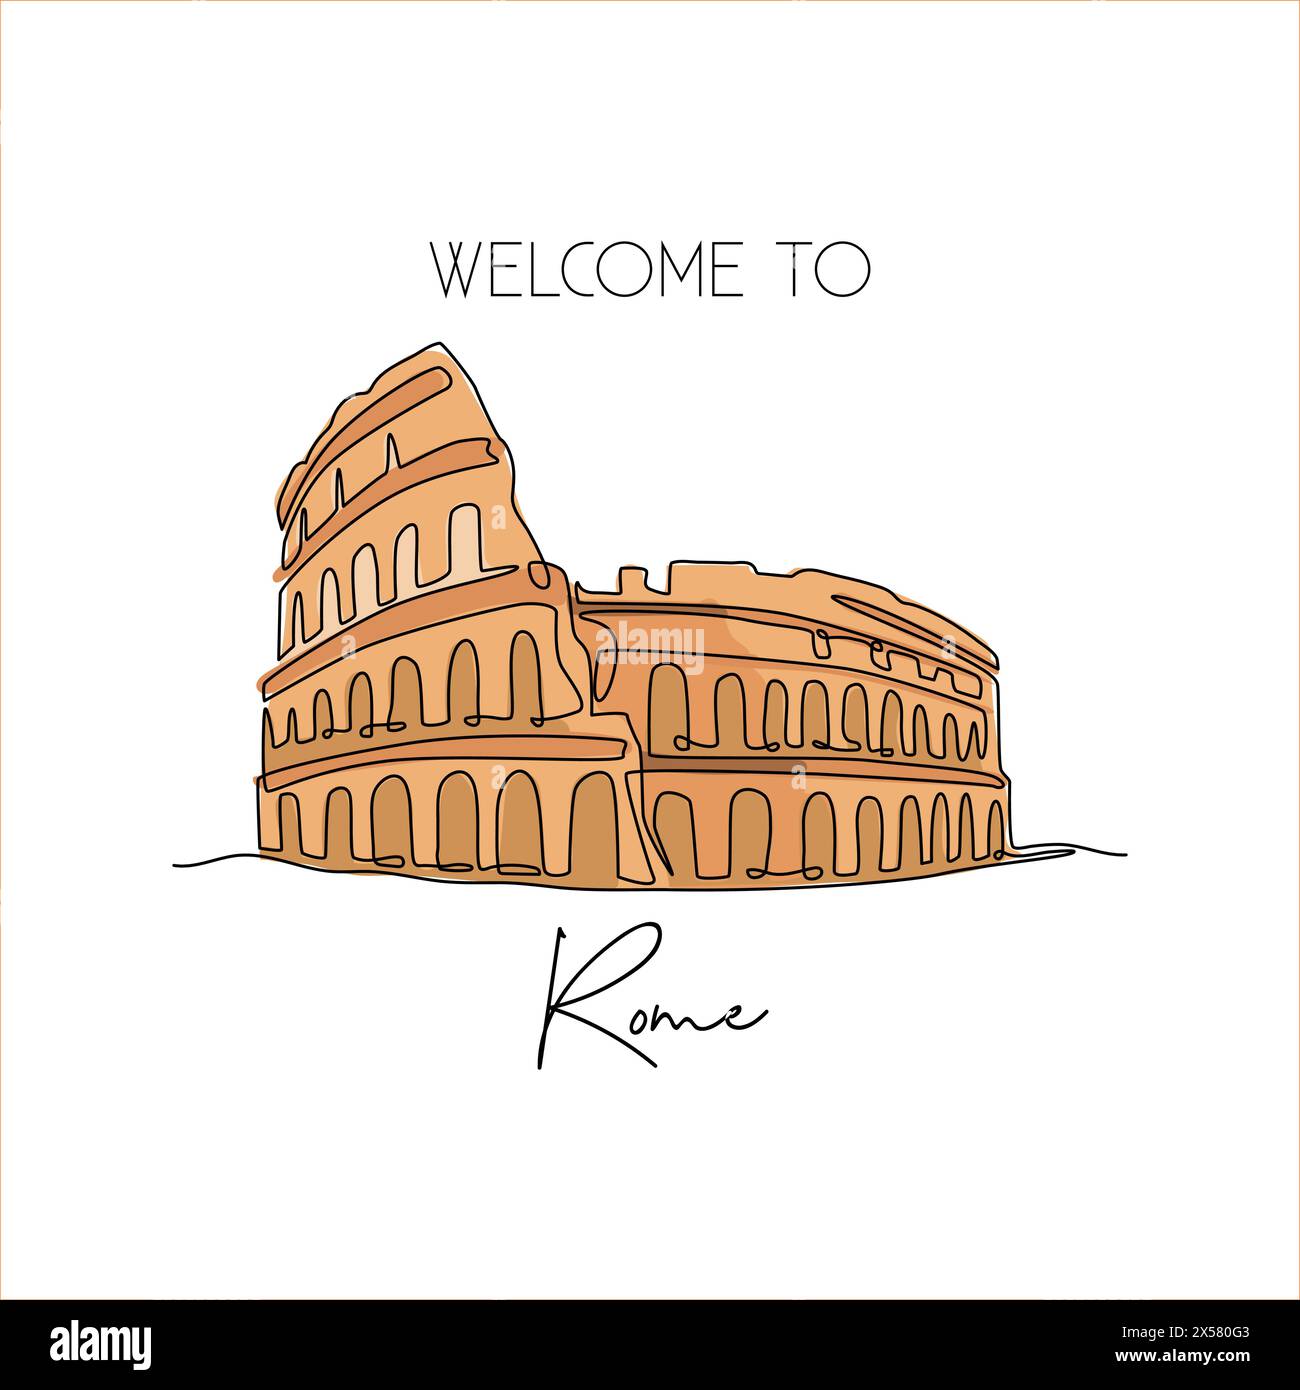 Single continuous line drawing Colosseum amphitheater. Iconic landmark place in Rome, Italy. World travel home decor wall art poster print concept. Mo Stock Vector